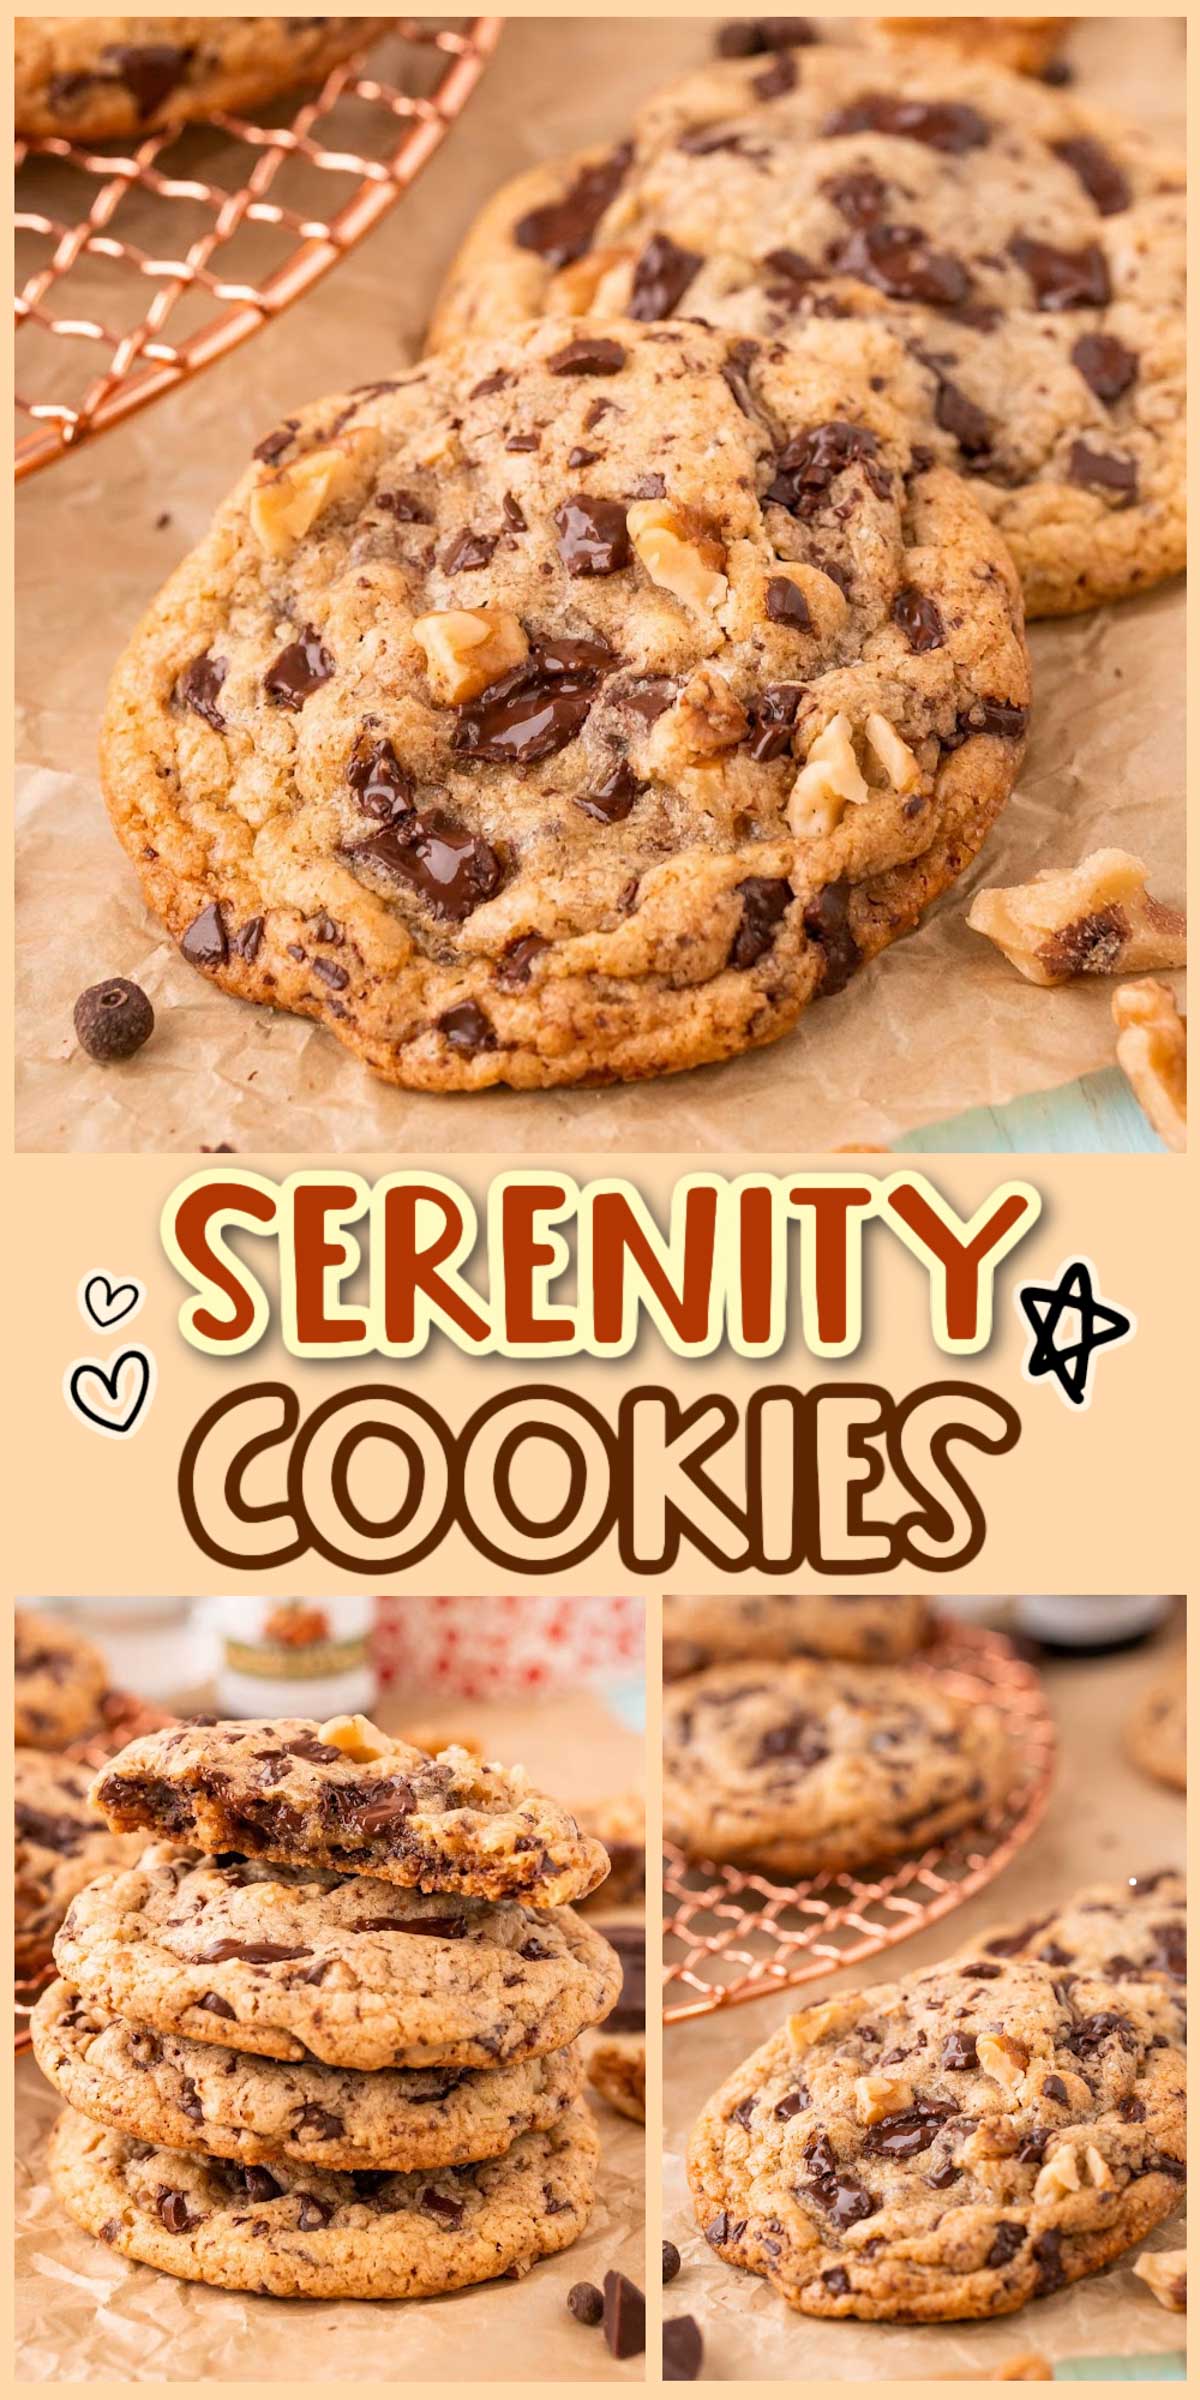 Serenity Cookies inspired by Sweet Magnolias are made with a brown butter dough, dark chocolate, walnuts, allspice, and almond extract for a tender, chewy, and flavorful cookie. via @sugarandsoulco